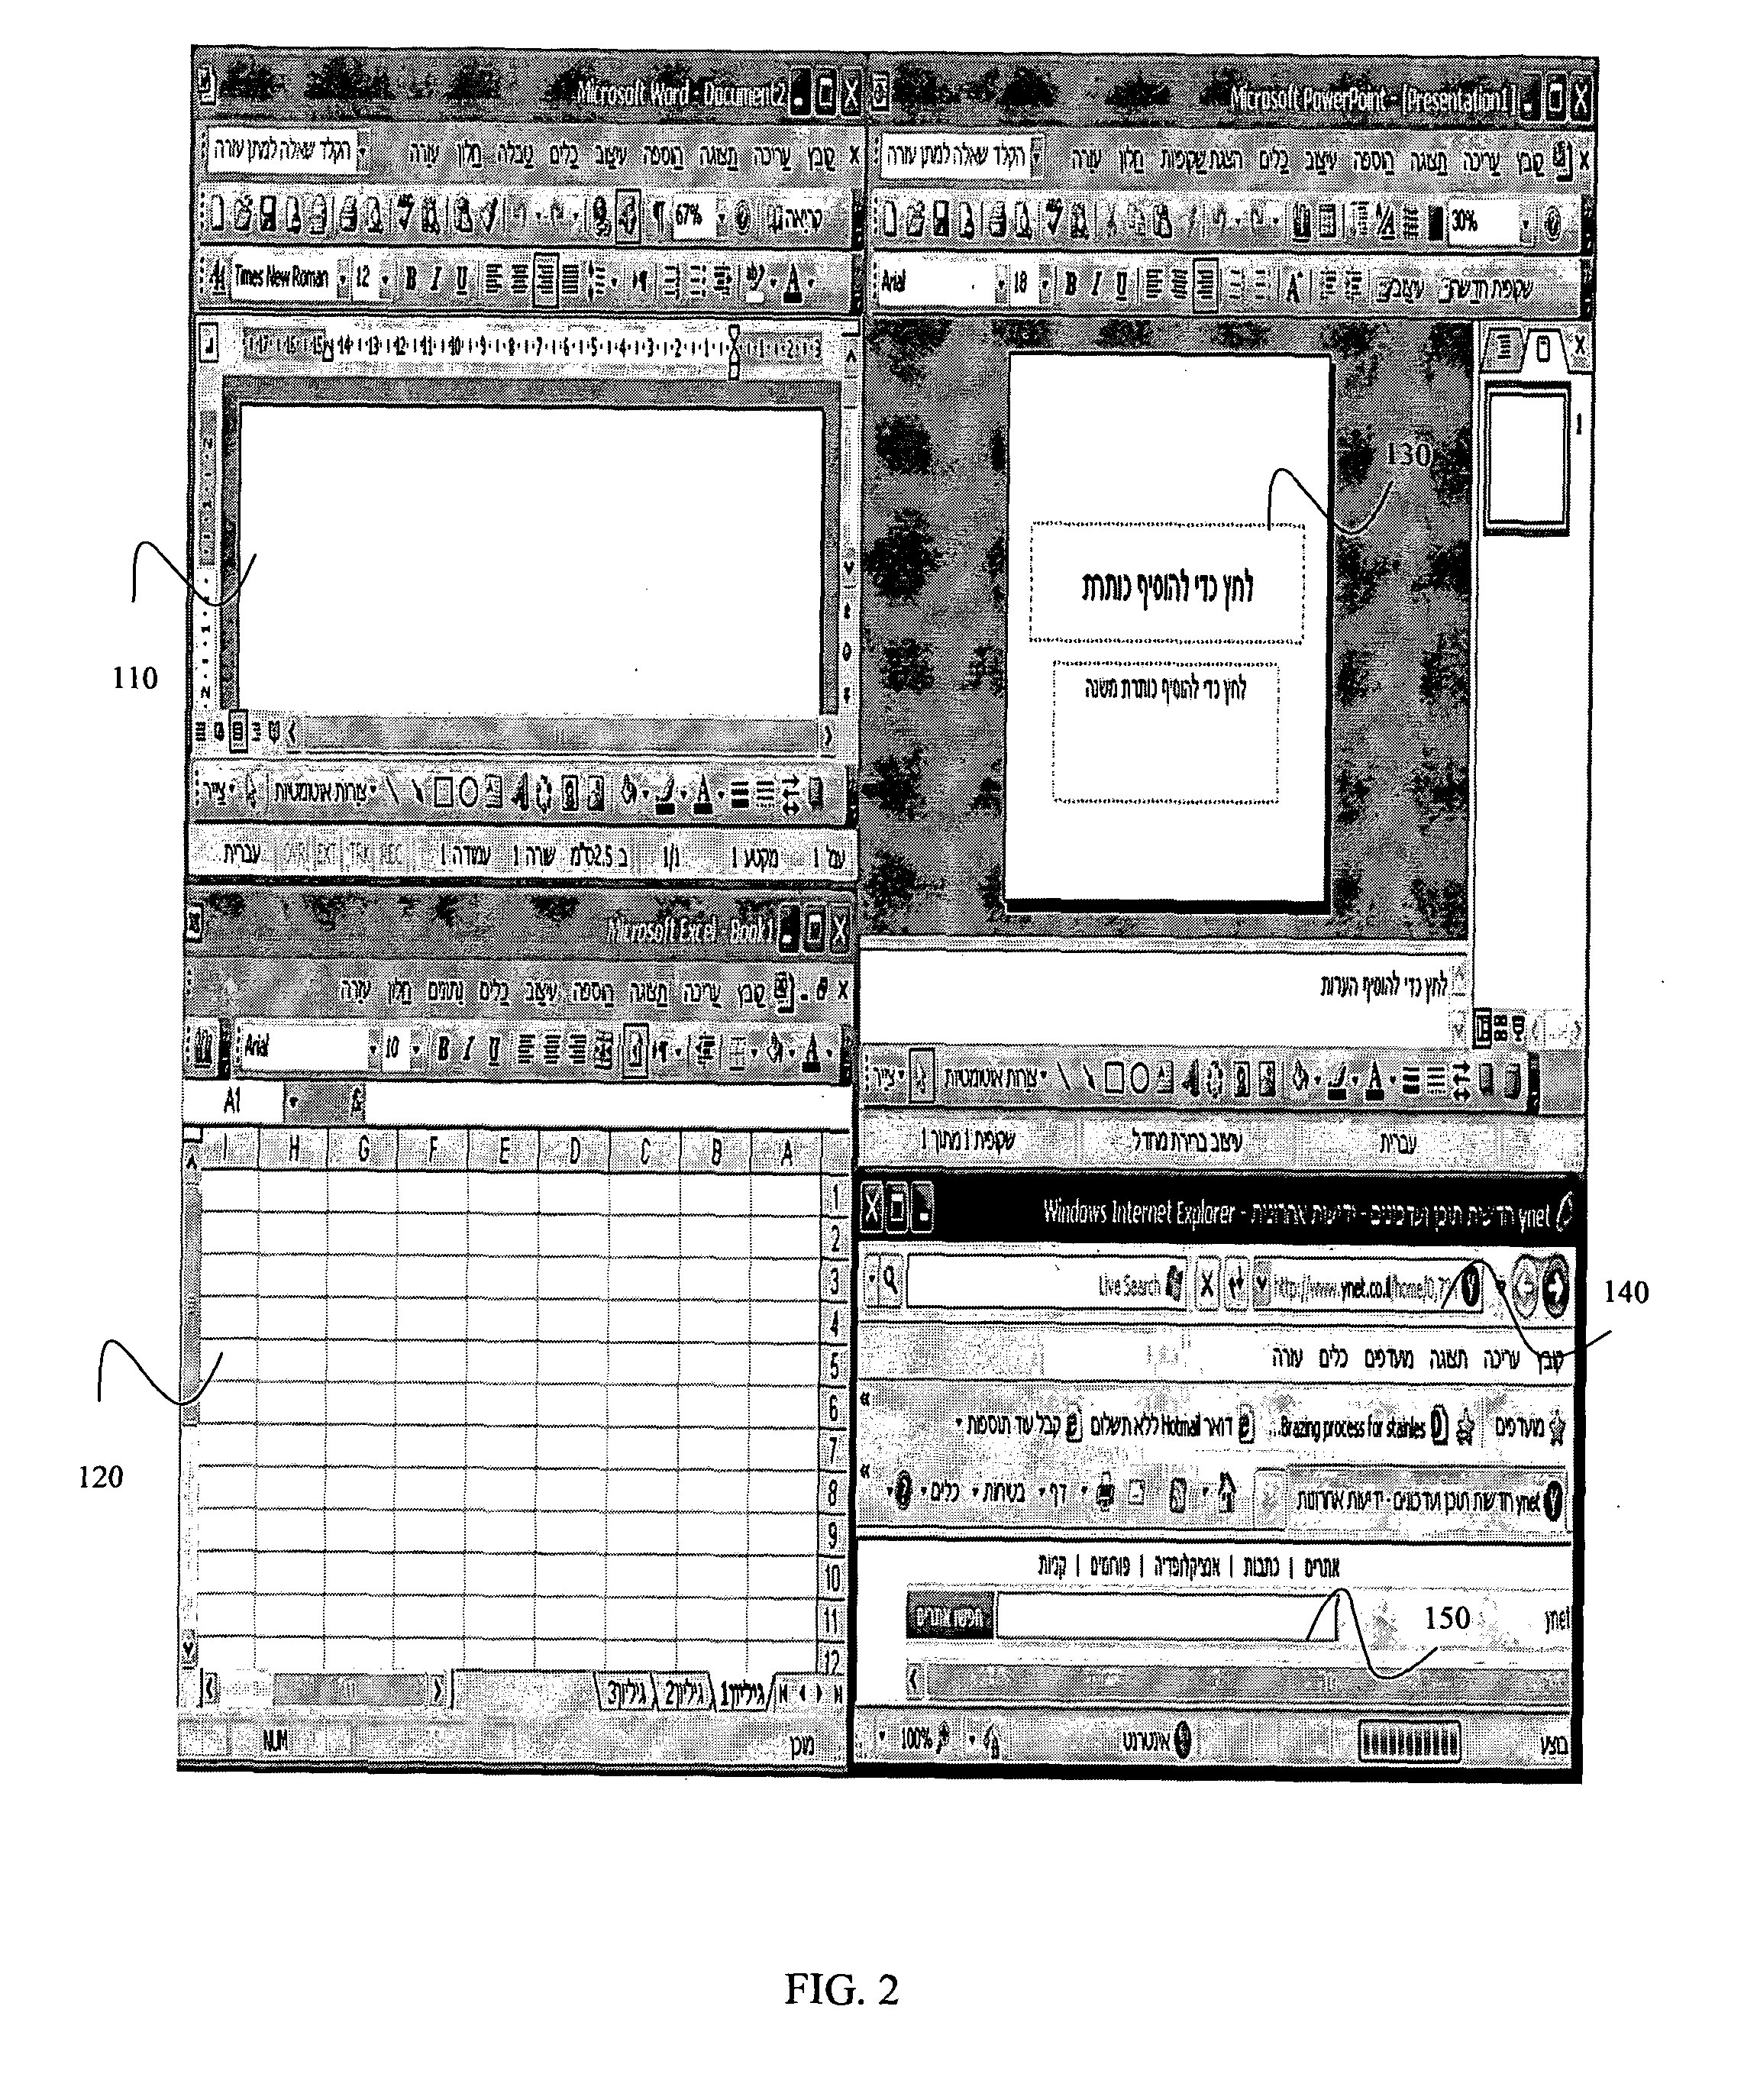 Content sensitive system and method for automatic input language selection